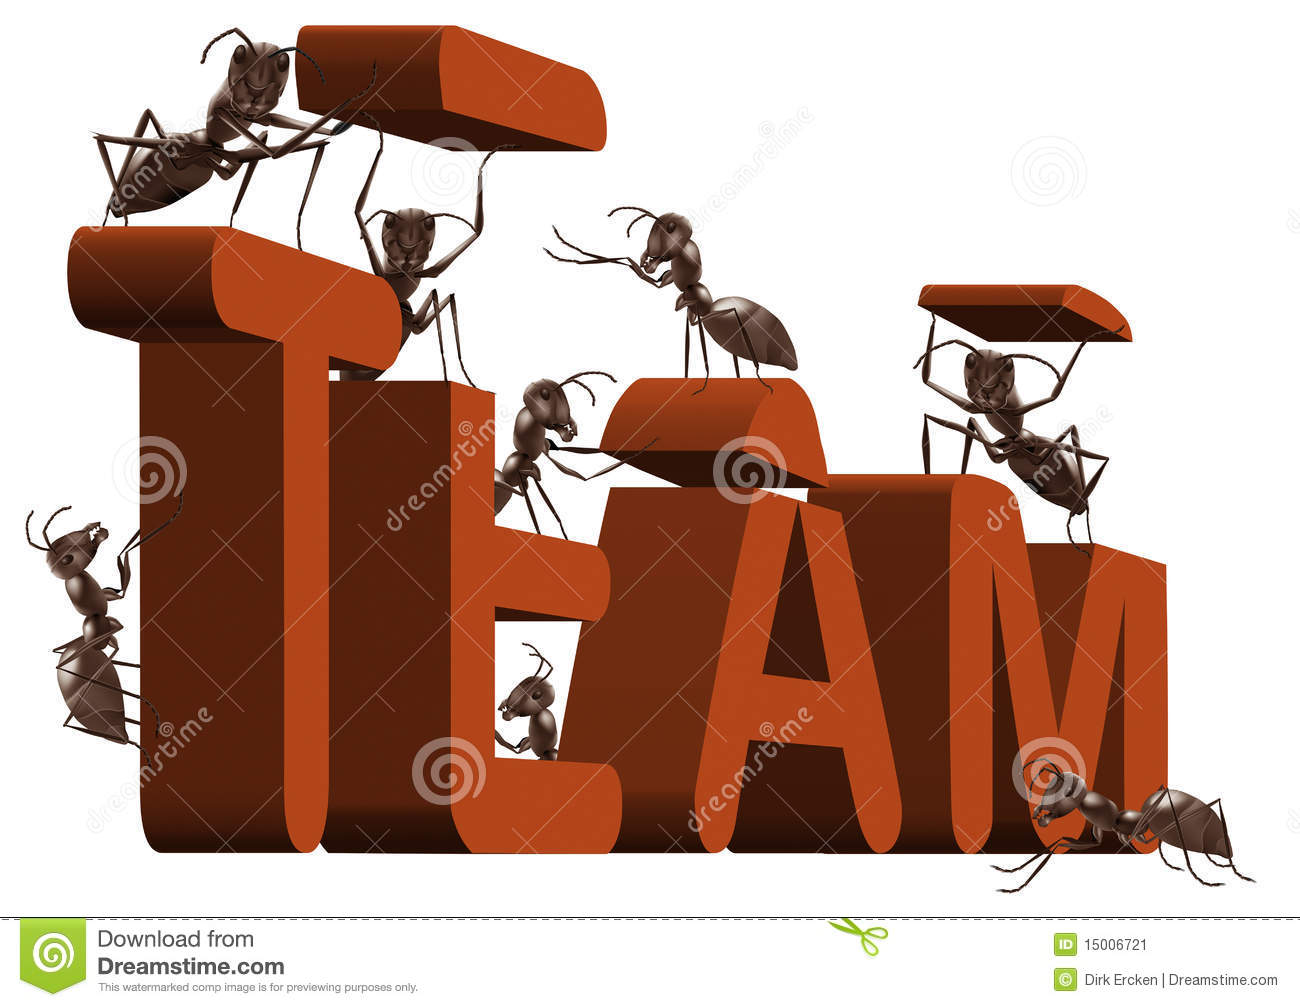 Ant Teamwork Team Building Or Work Cooperation Stock Image   Image